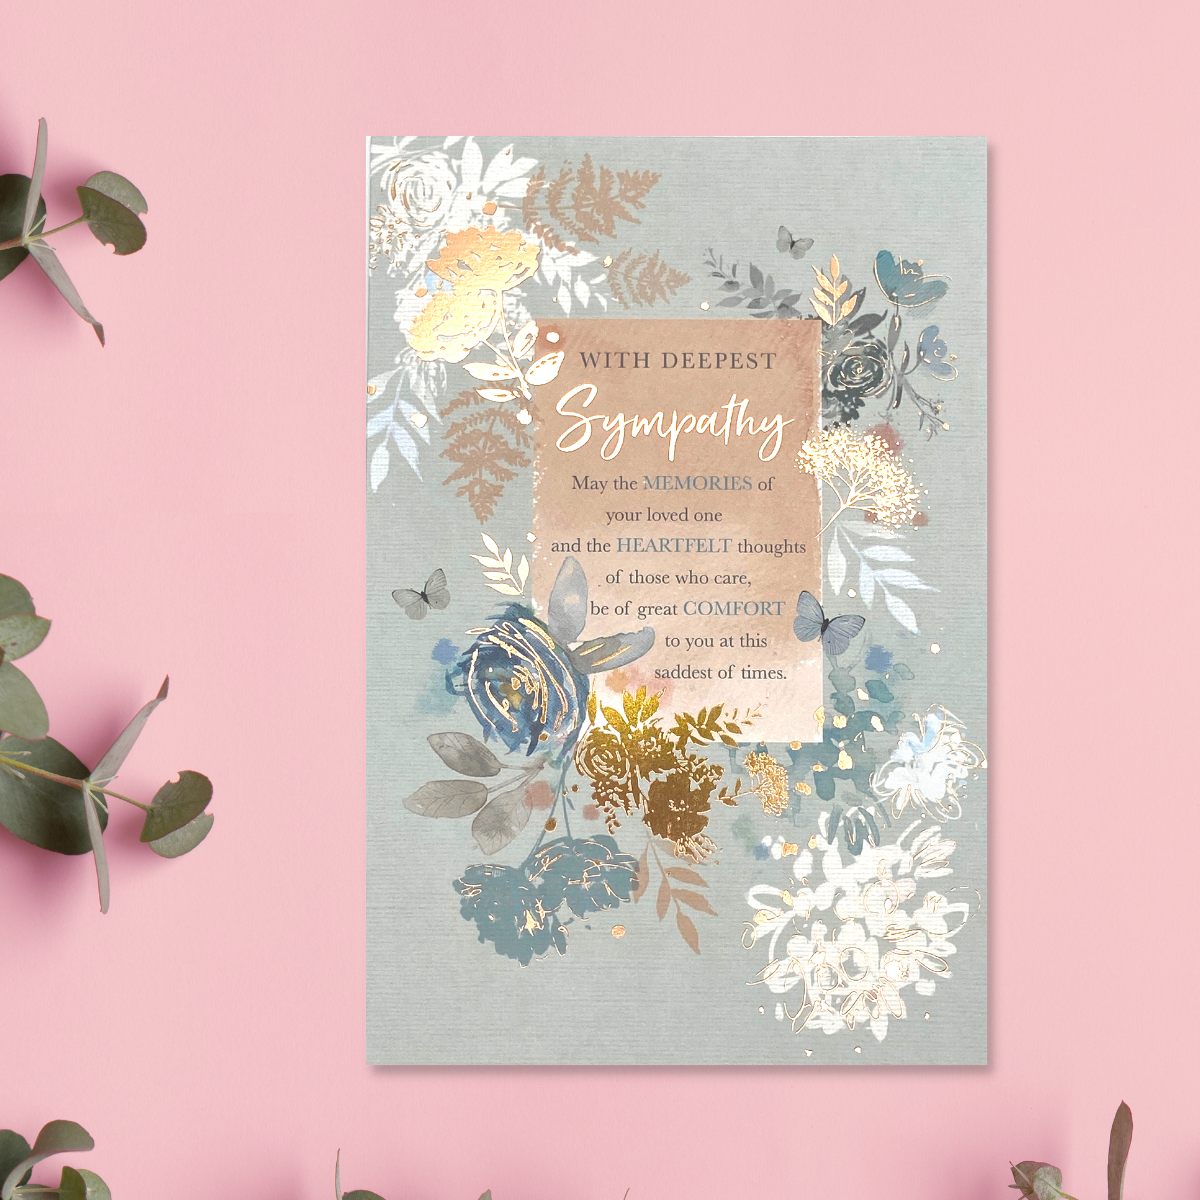 muted mint colour card with flowers and butterflies, heartfelt verse and rose gold foil accents